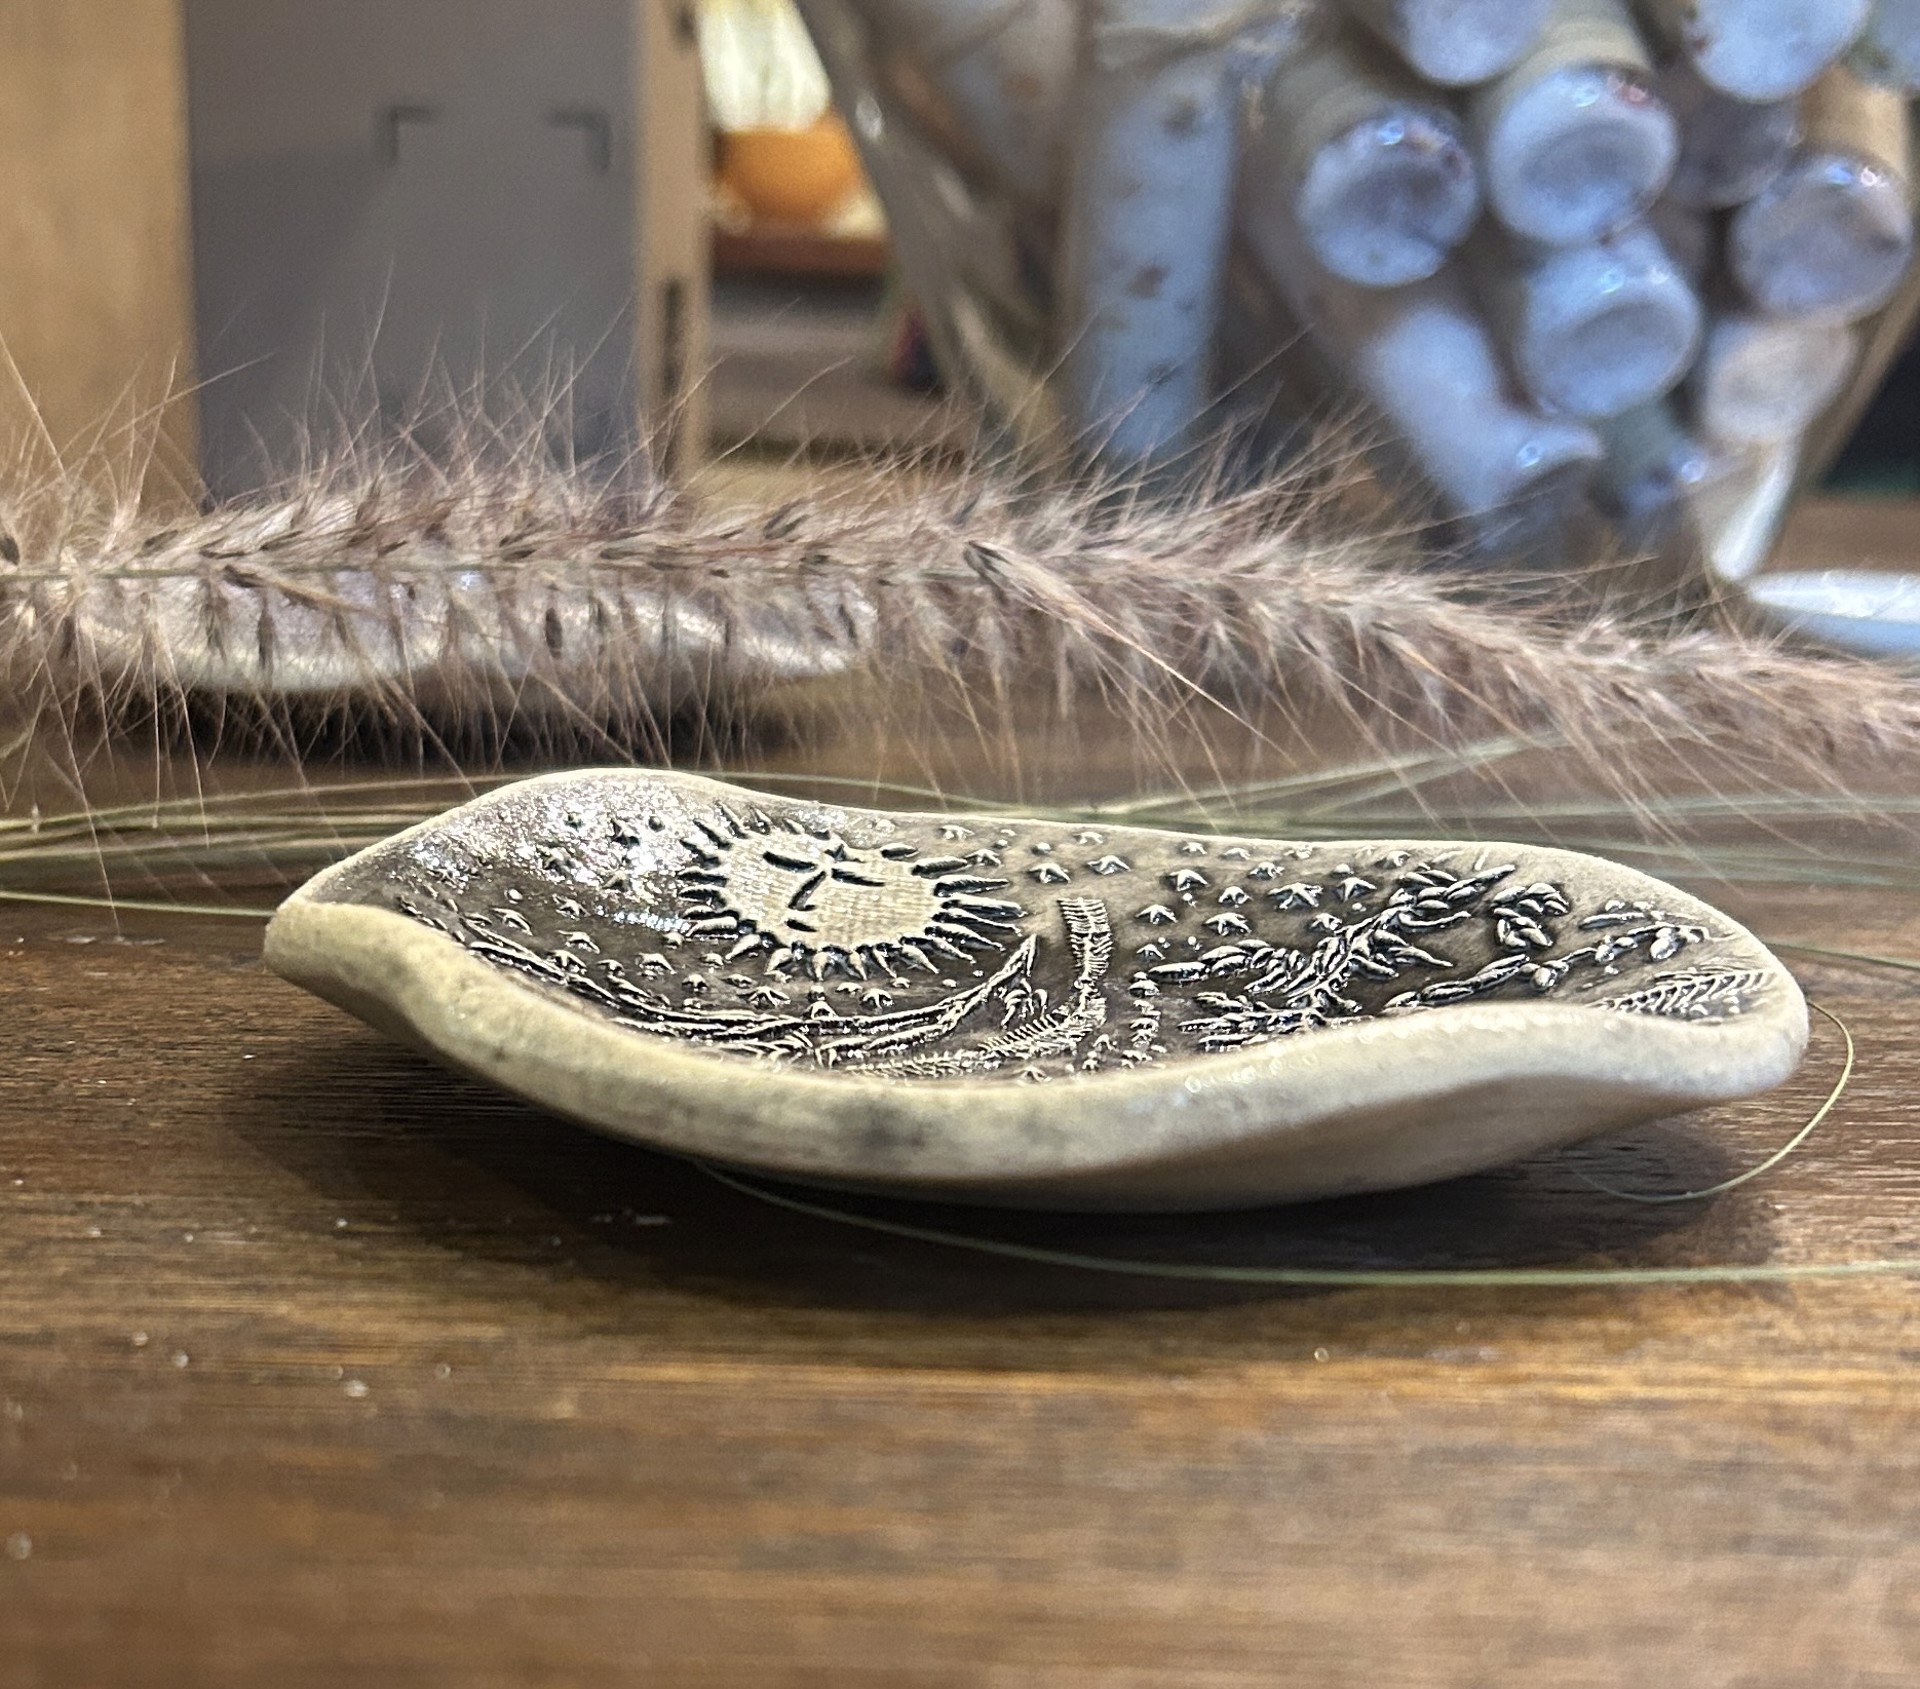 Black Rabbit Moon Dish by Clay Fossils